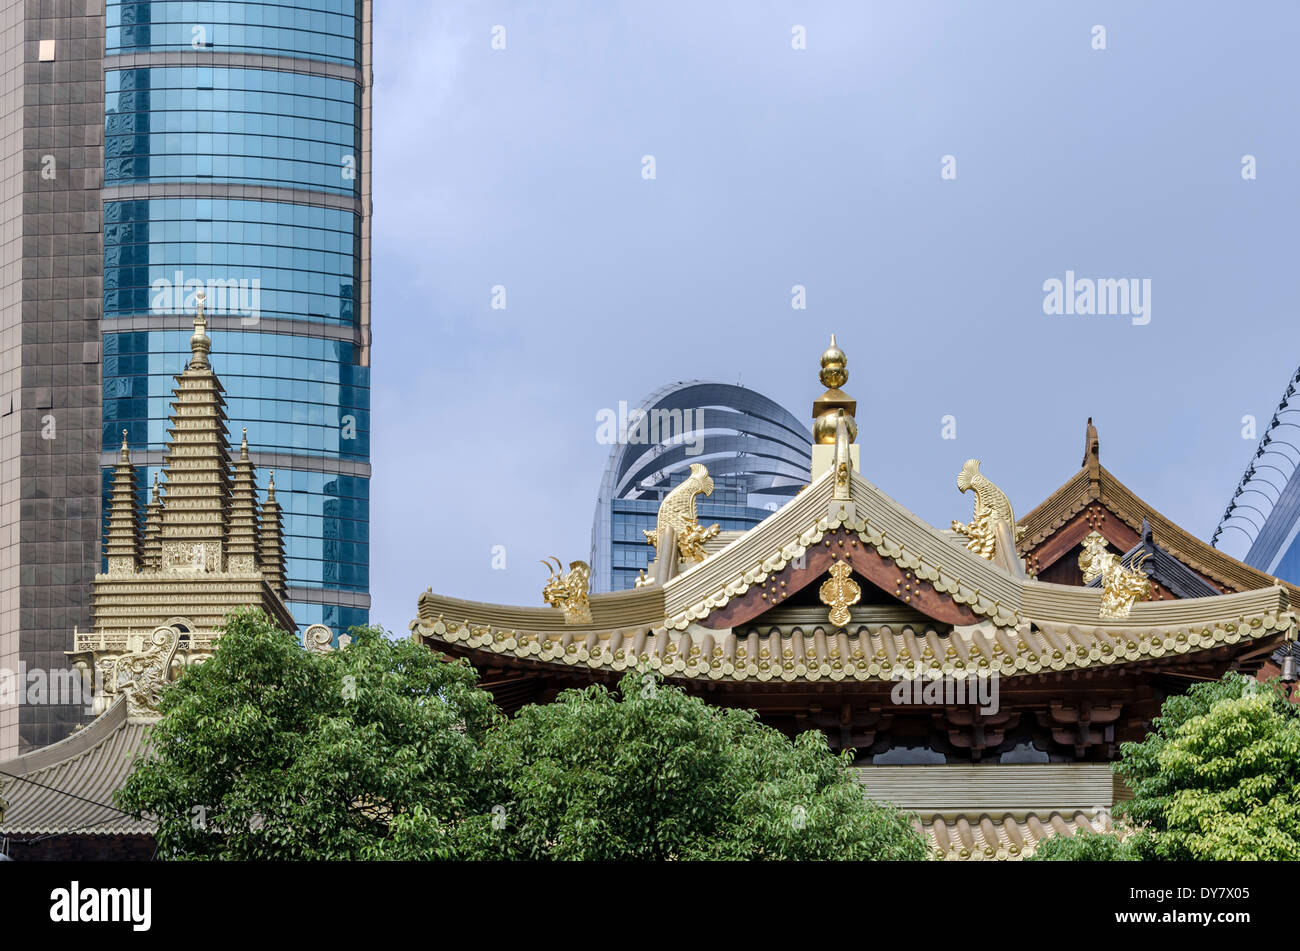 Architecture, Jing'an Temple, Shanghai, China Stock Photo